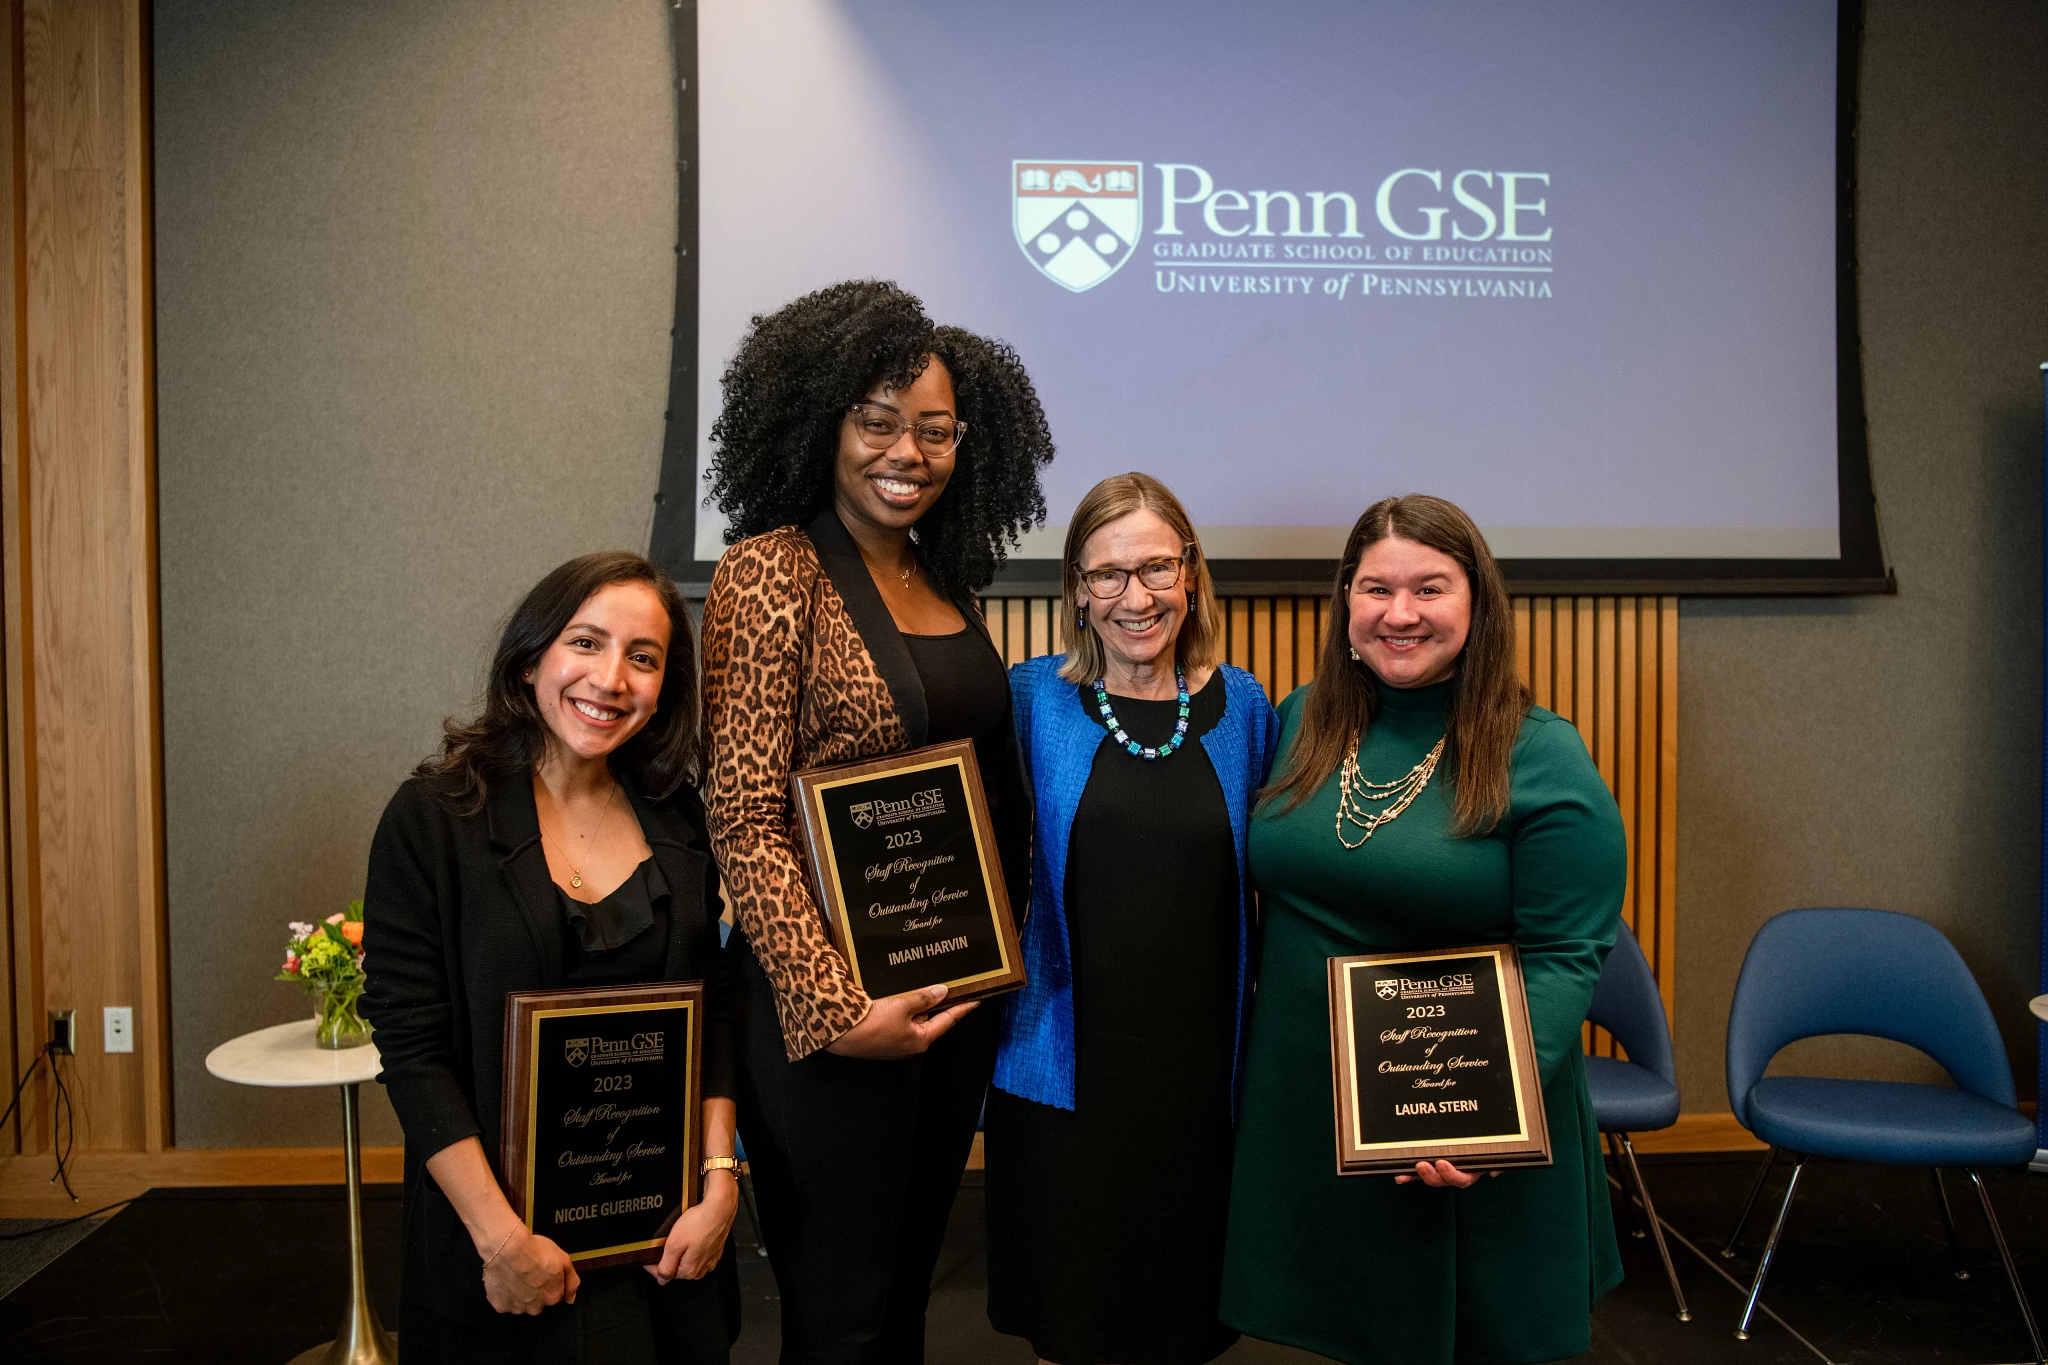 Dean Grossman poses with the three smiling Penn GSE staffers who are holding their awards.